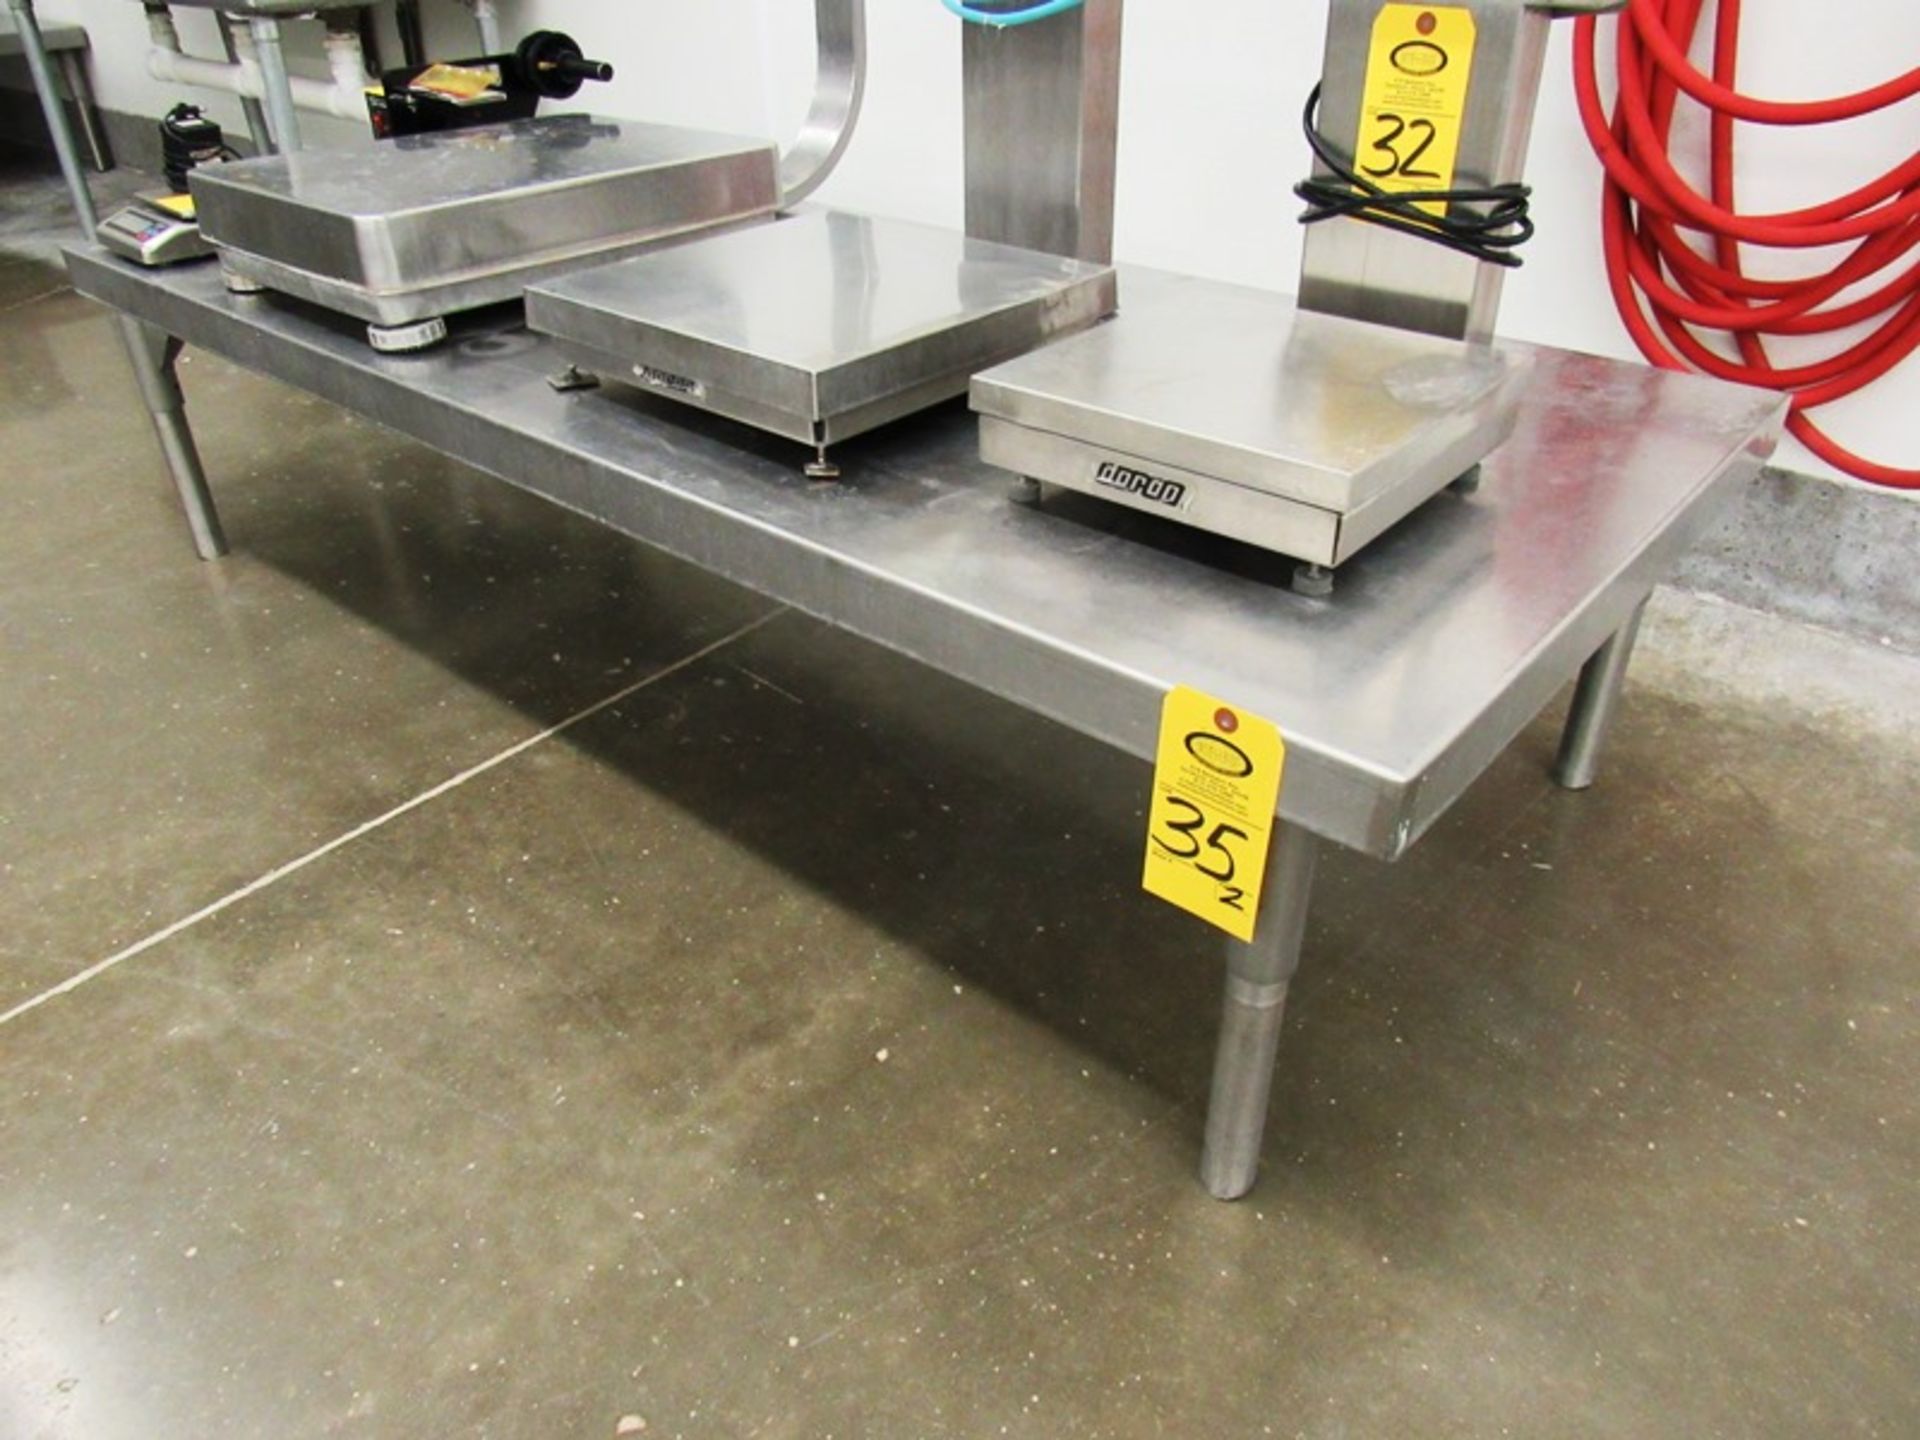 Stainless Steel Tables, 30" W X 6' L X 17" T (Removal Begins July 5th) Loading Fee $35 Rigger: